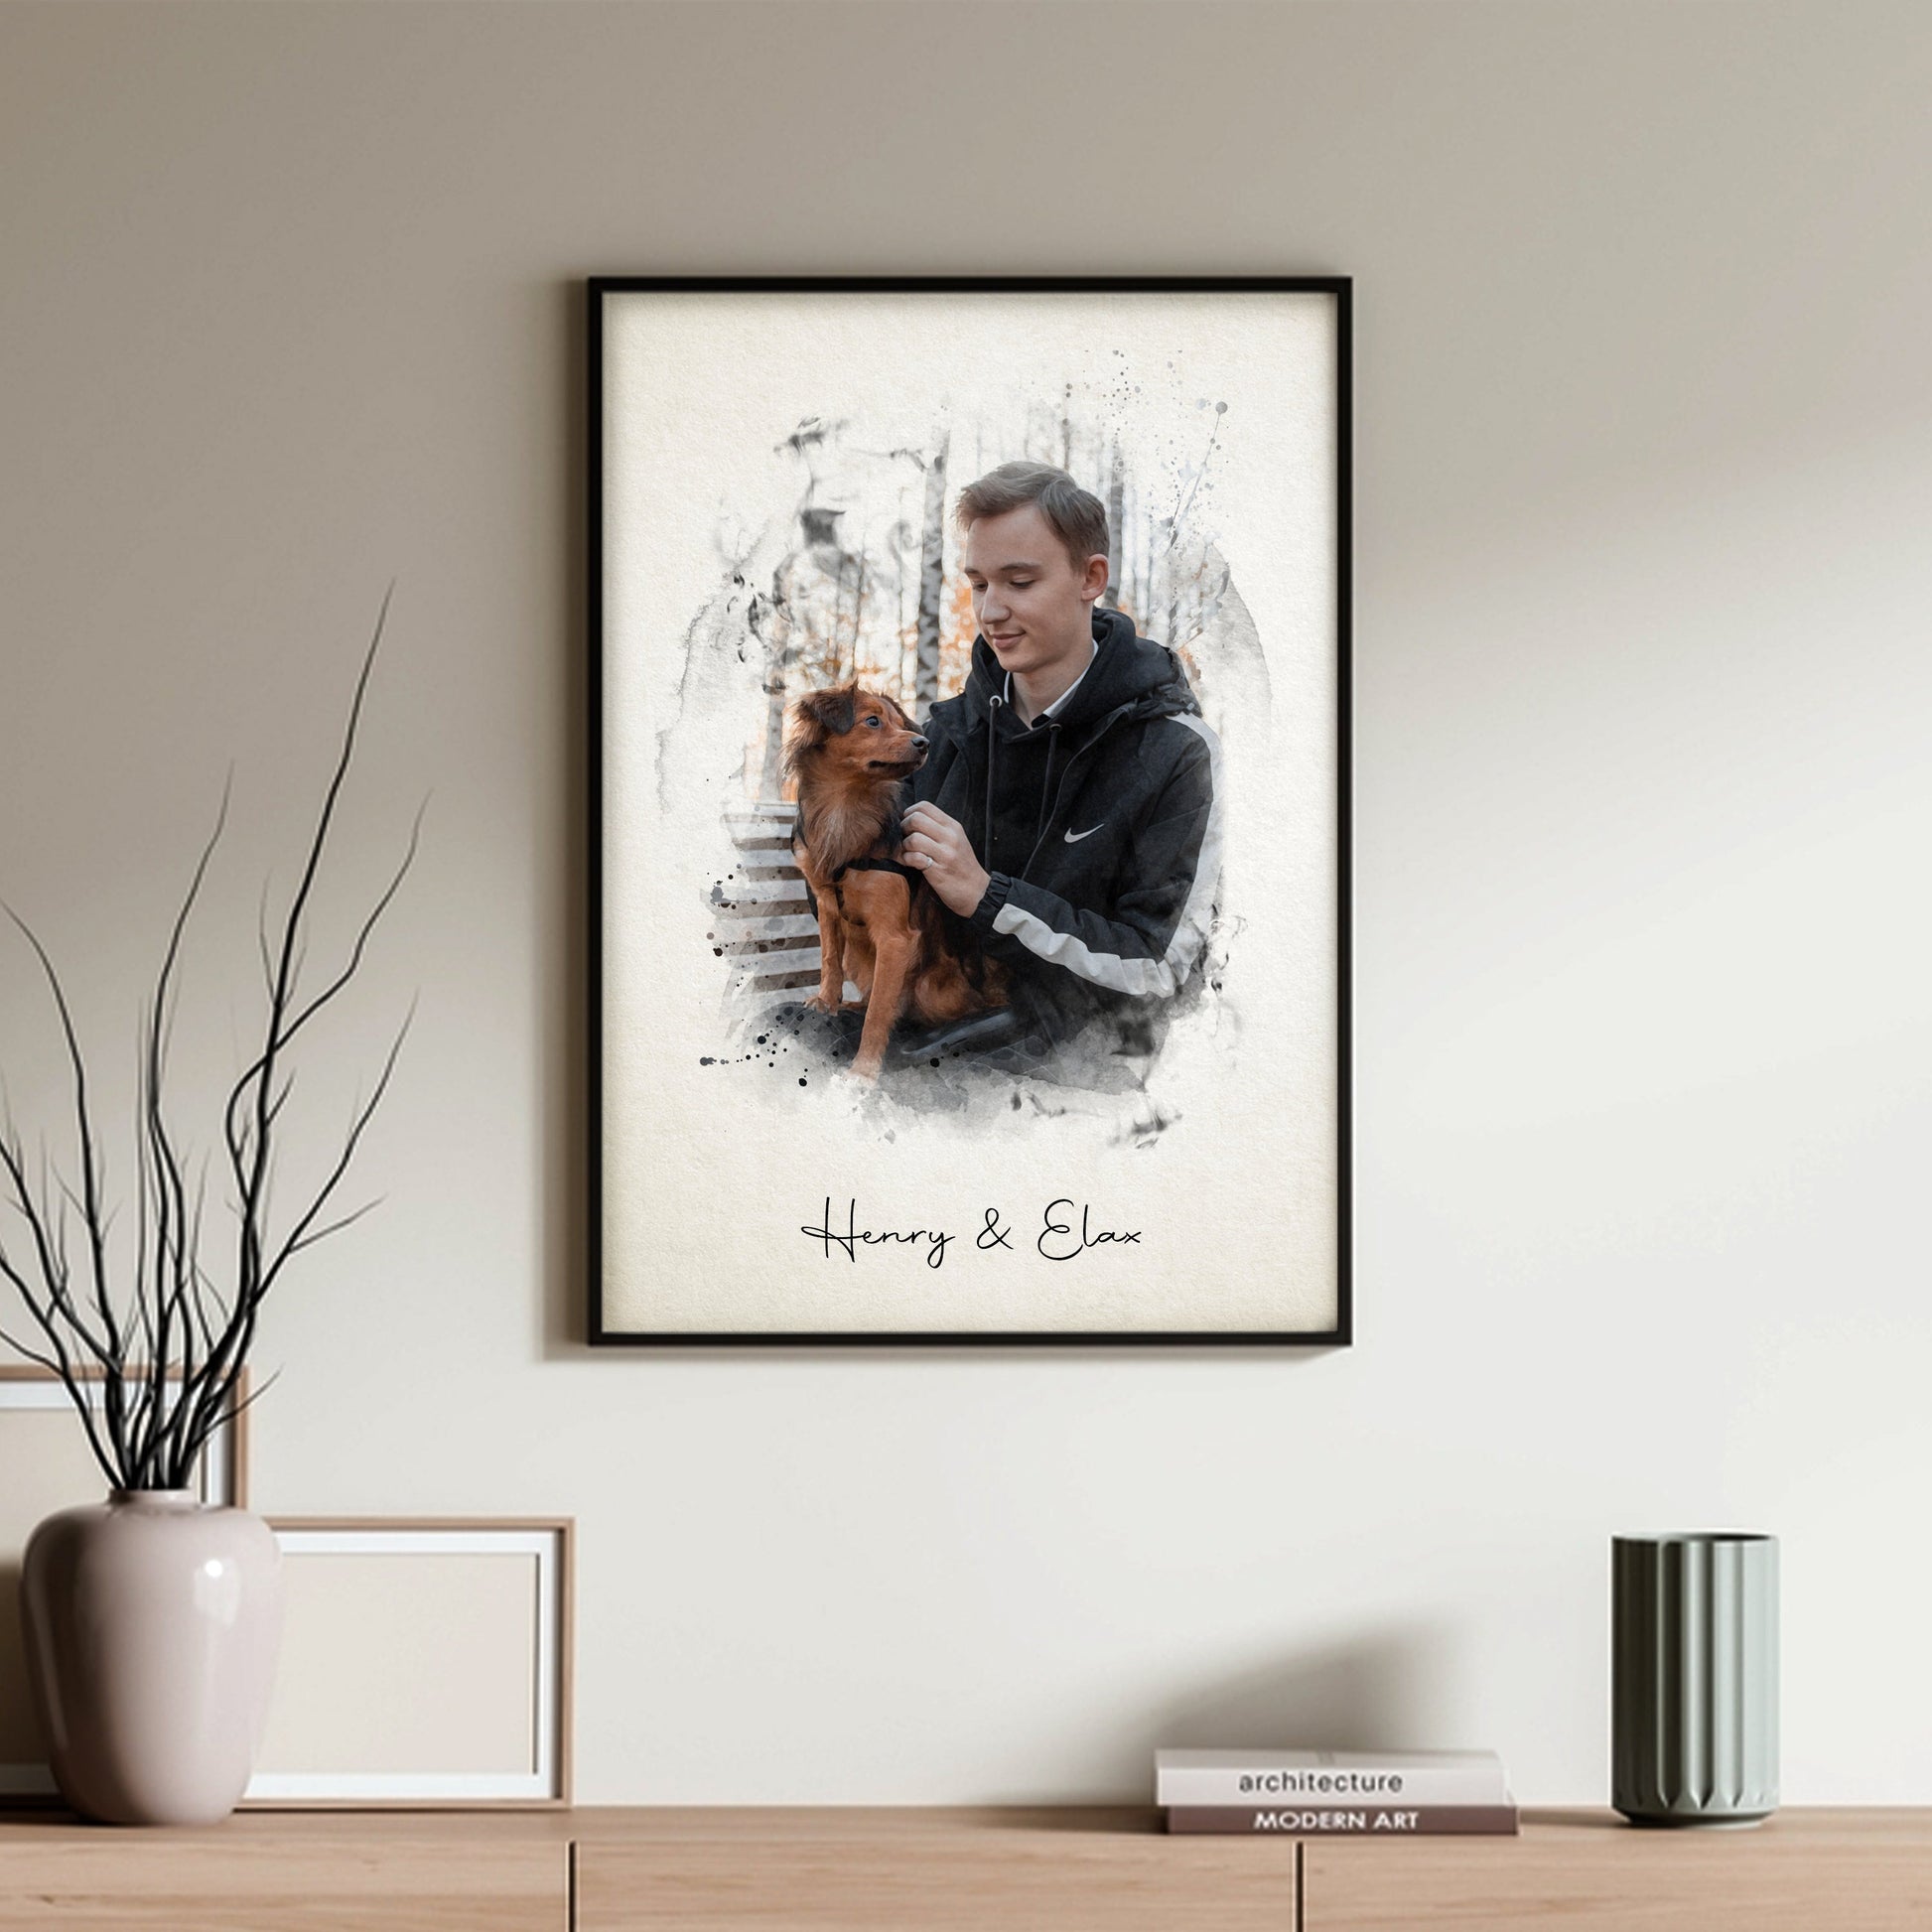 Custom memorial portrait of man with beloved dog on wall.